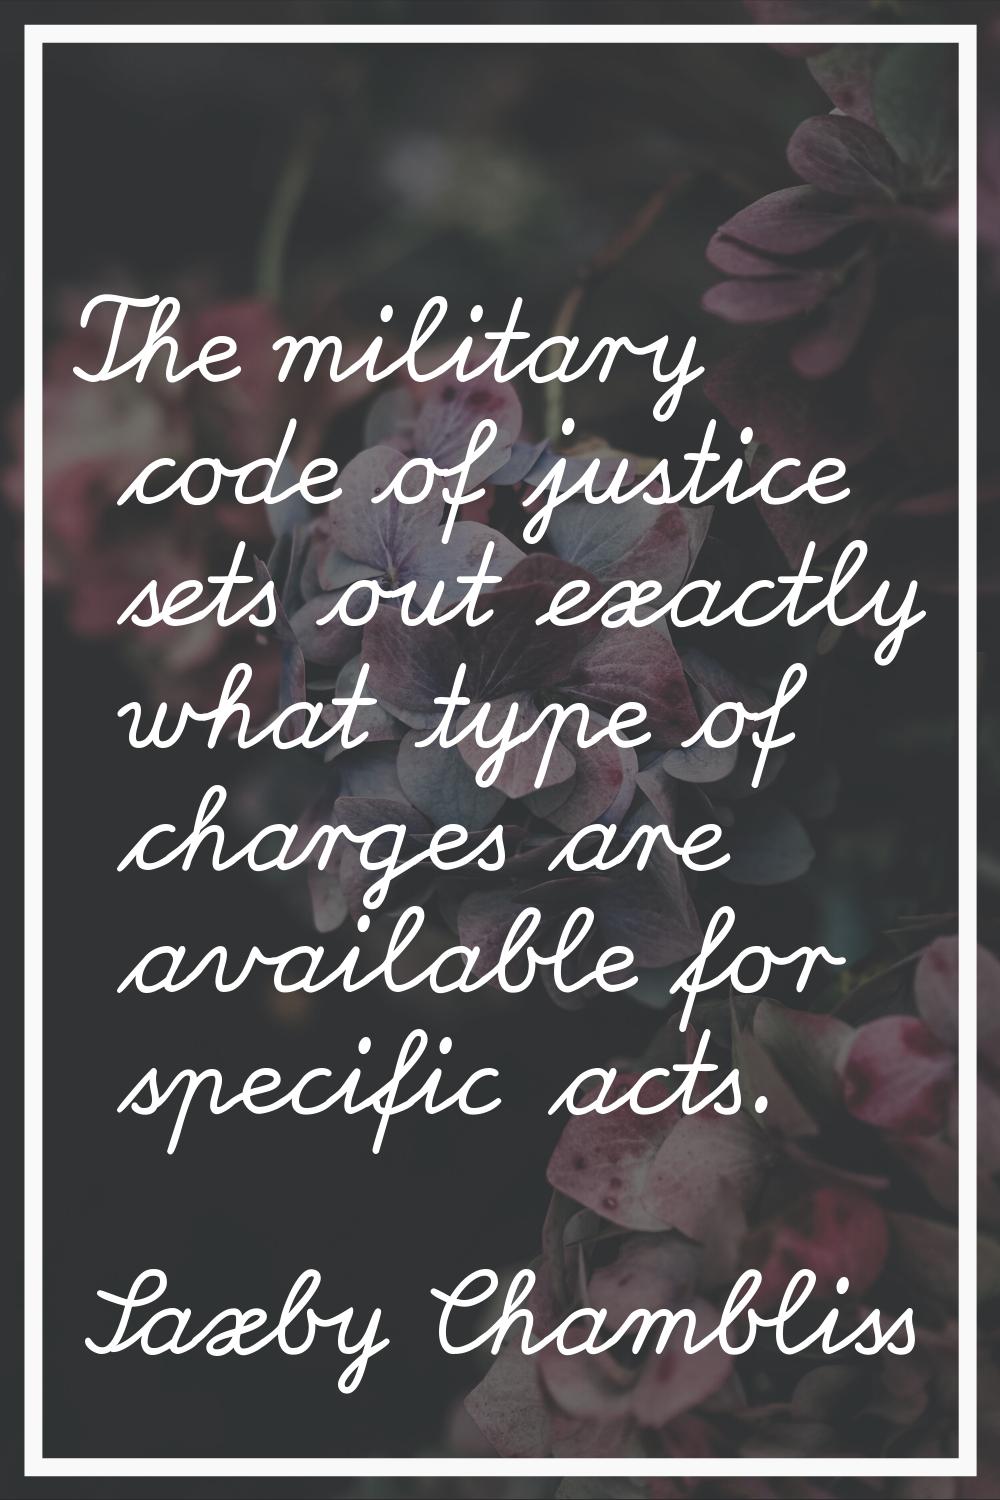 The military code of justice sets out exactly what type of charges are available for specific acts.